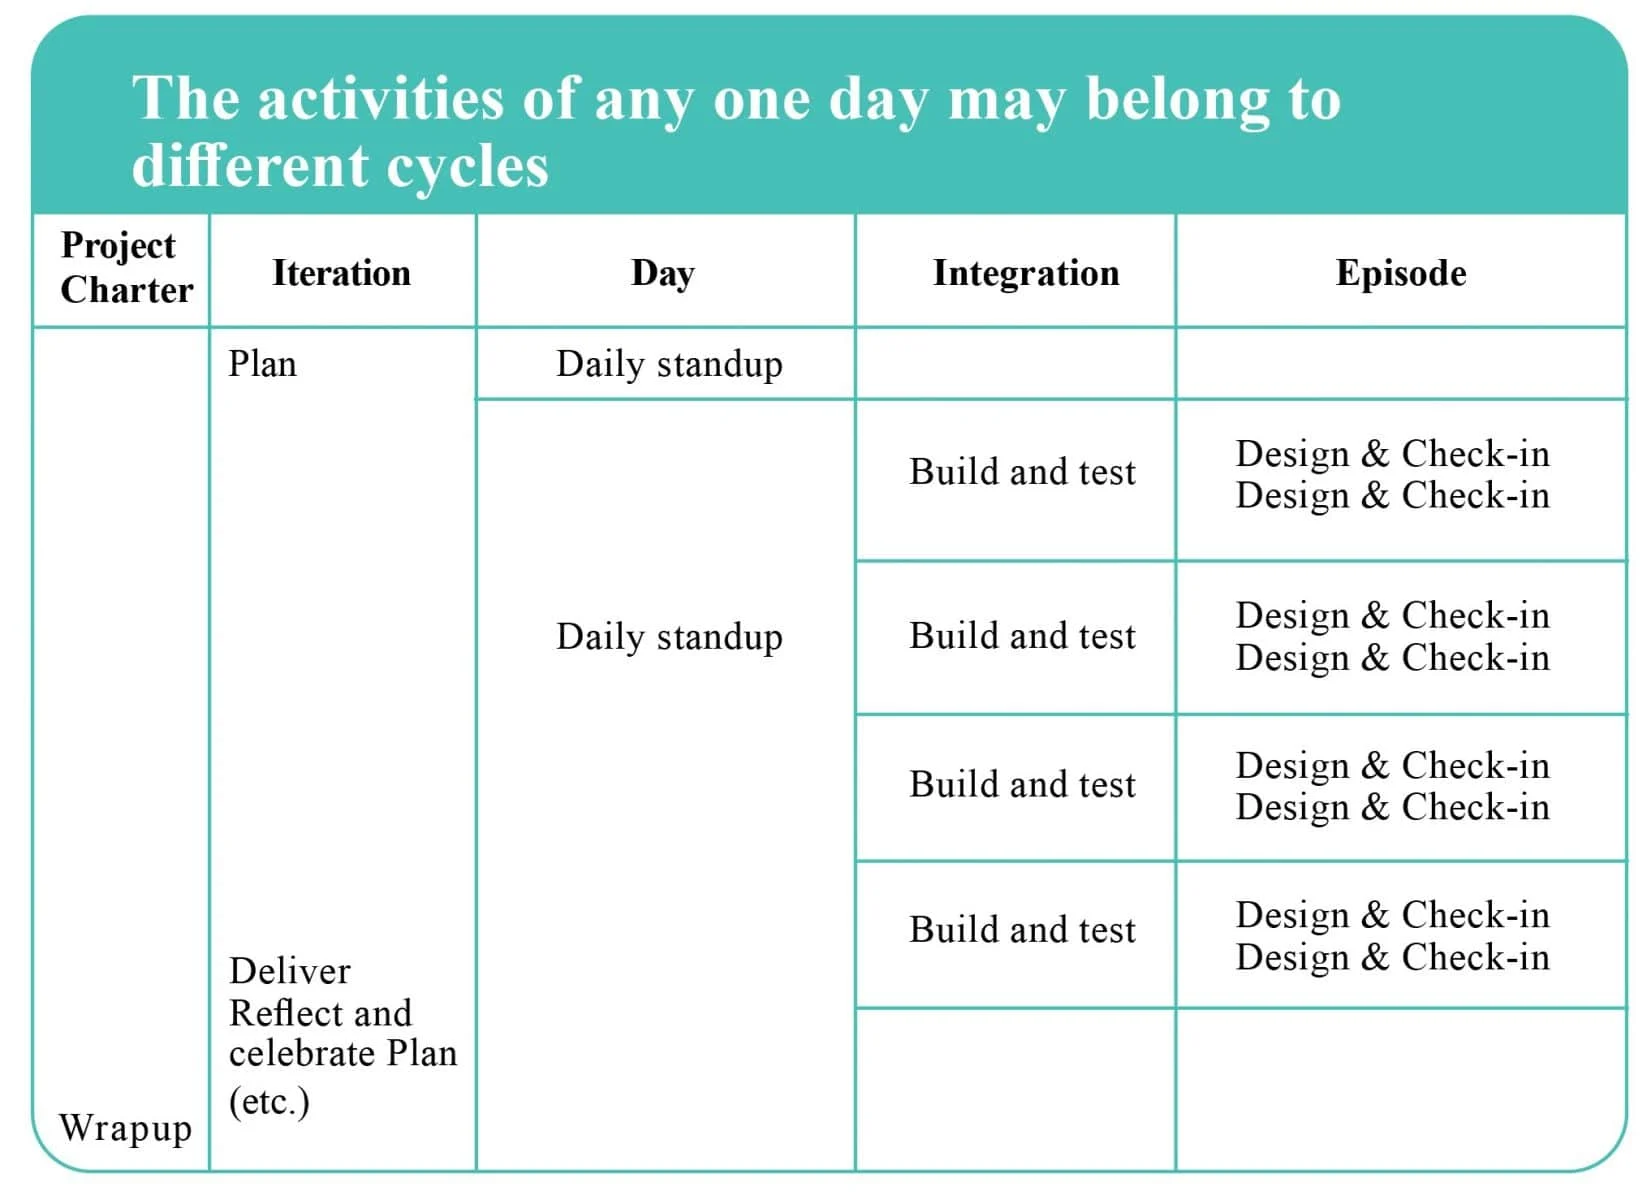 Examples of activities in different cycles